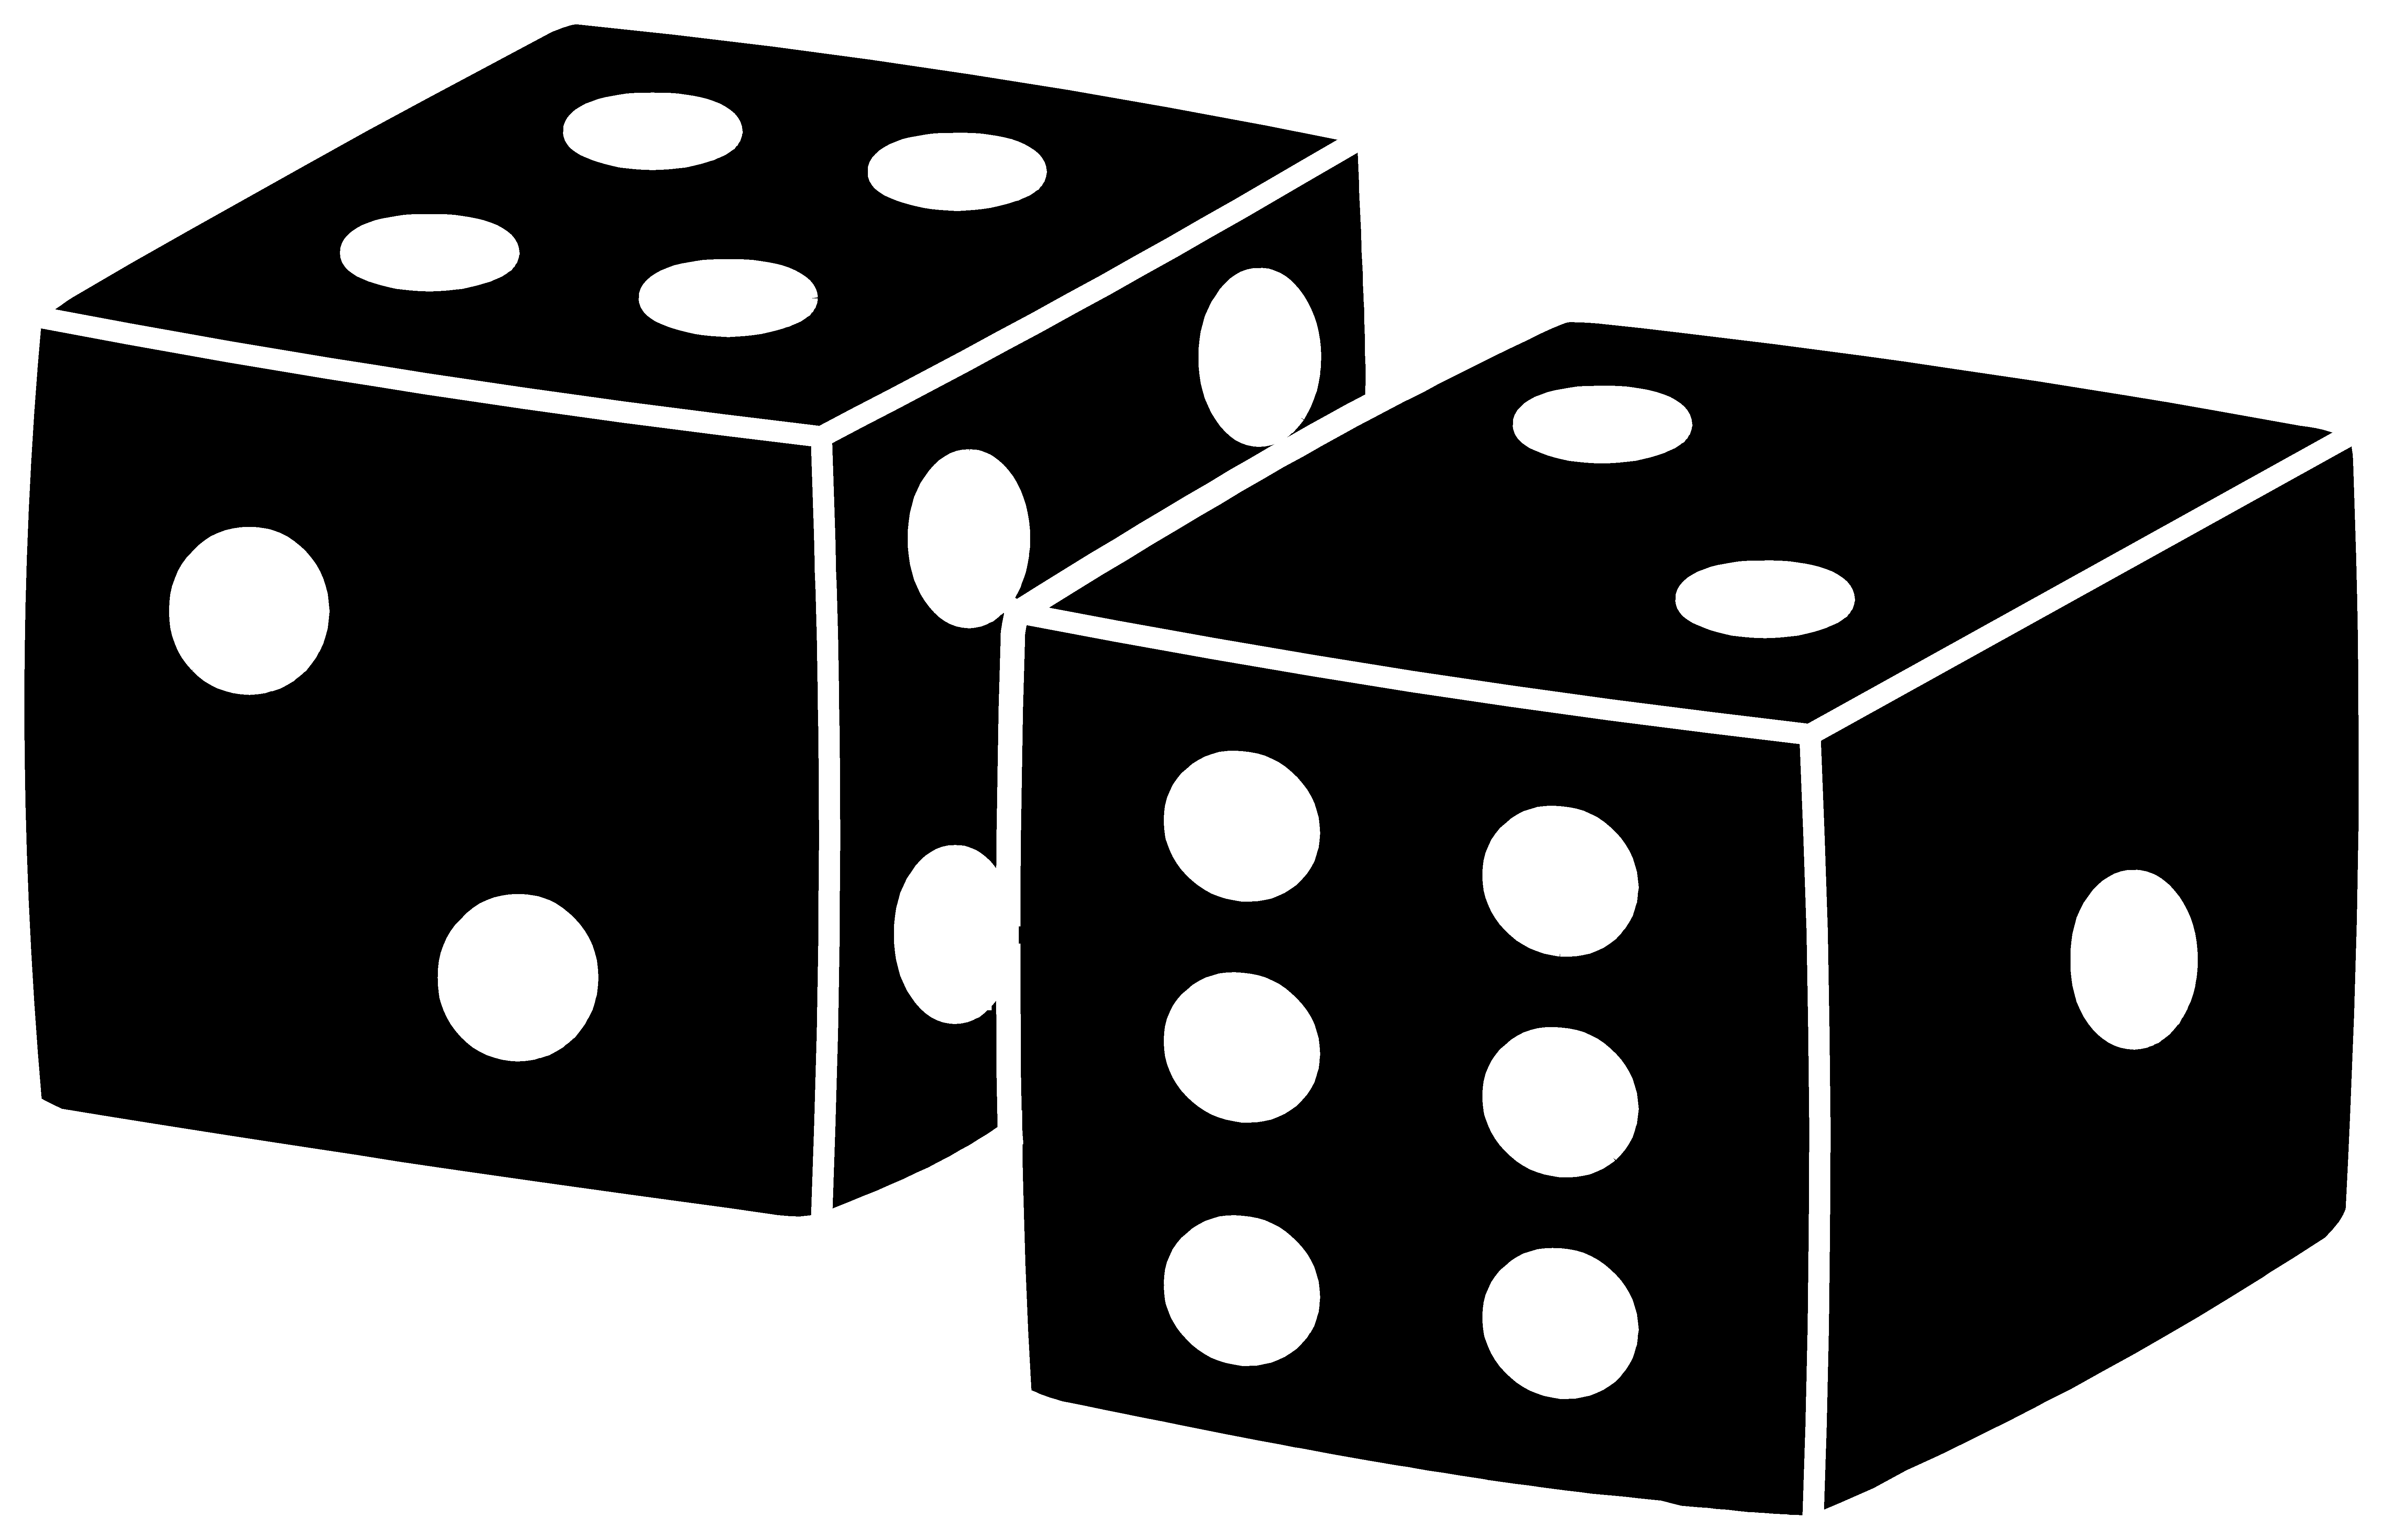 Detail Free Clipart Of Dice Nomer 20